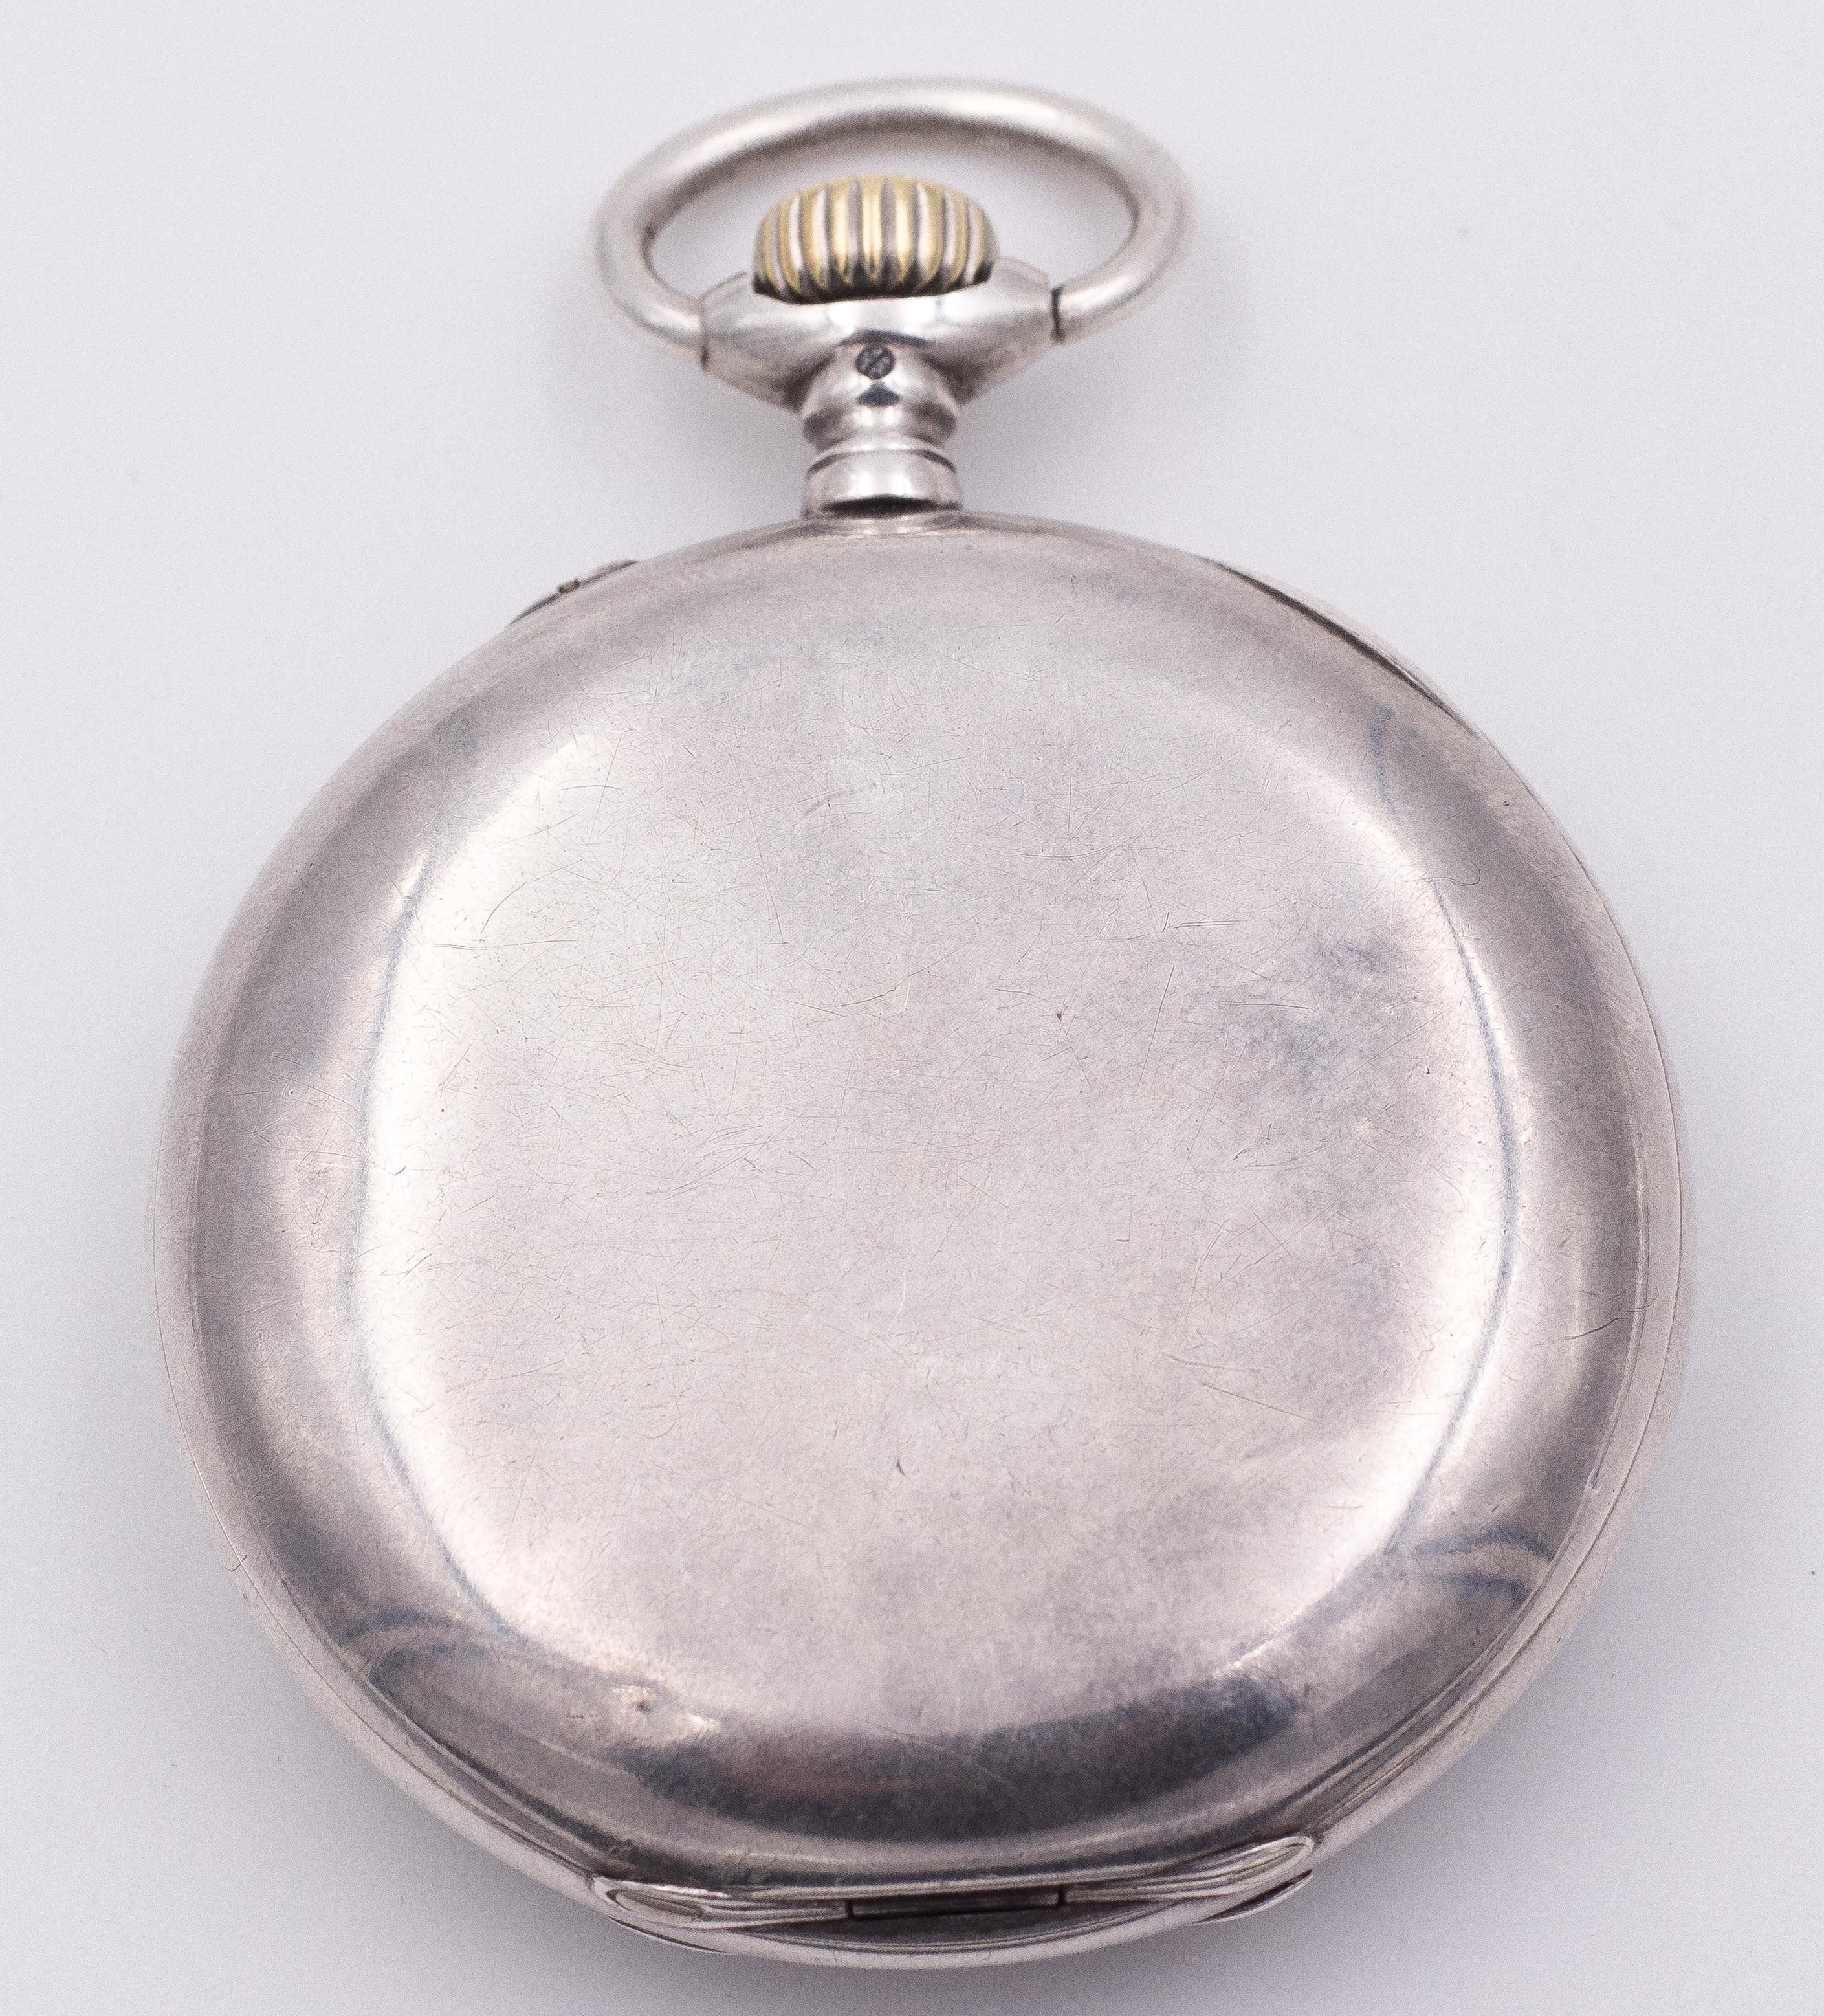 An antique silver IWC International Watch Company pocket watch, dating from the late 19th Century. 
The watch is well working. 

BRAND
IWC International Watch Company

MATERIALS
Silver

MEASUREMENTS
Diameter: 53 mm